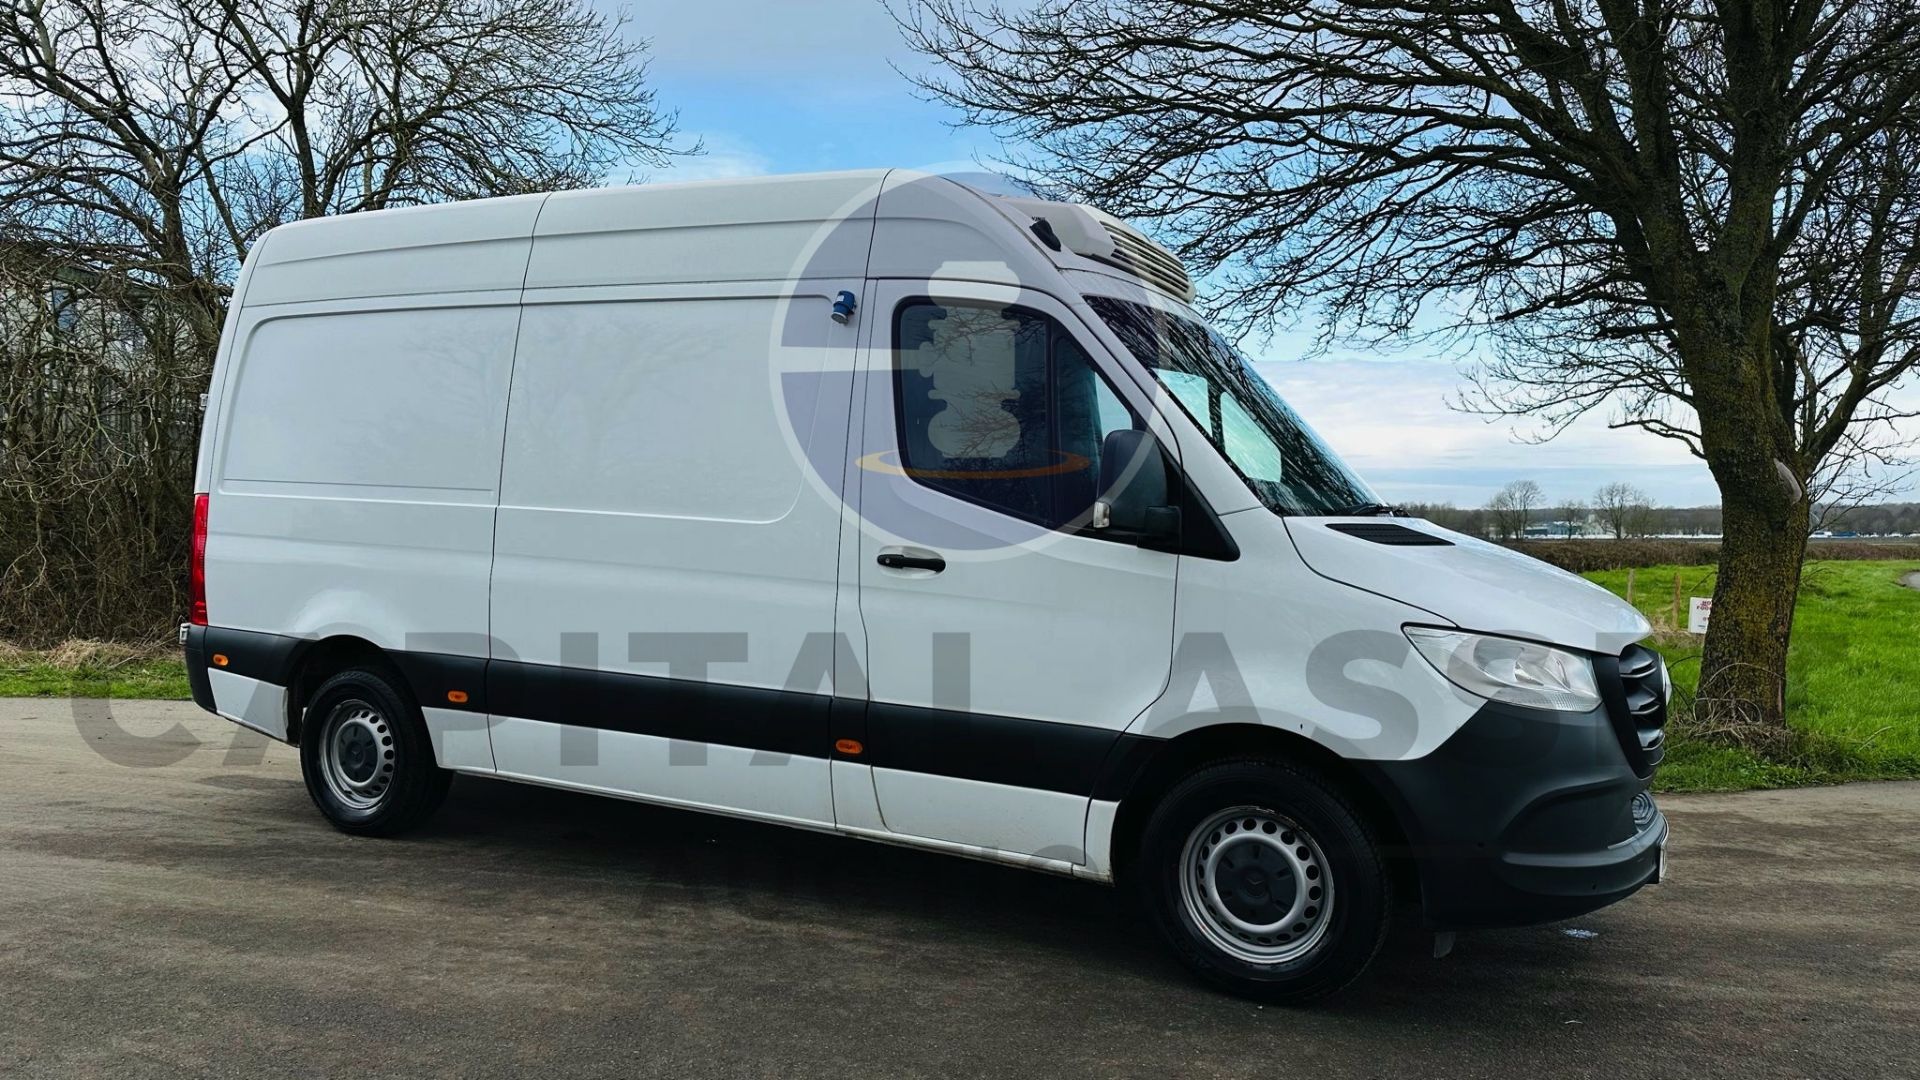 MERCEDES-BENZ SPRINTER 314 CDI *MWB - REFRIGERATED VAN* (2019 - FACELIFT MODEL) *OVERNIGHT STANDBY* - Image 2 of 41